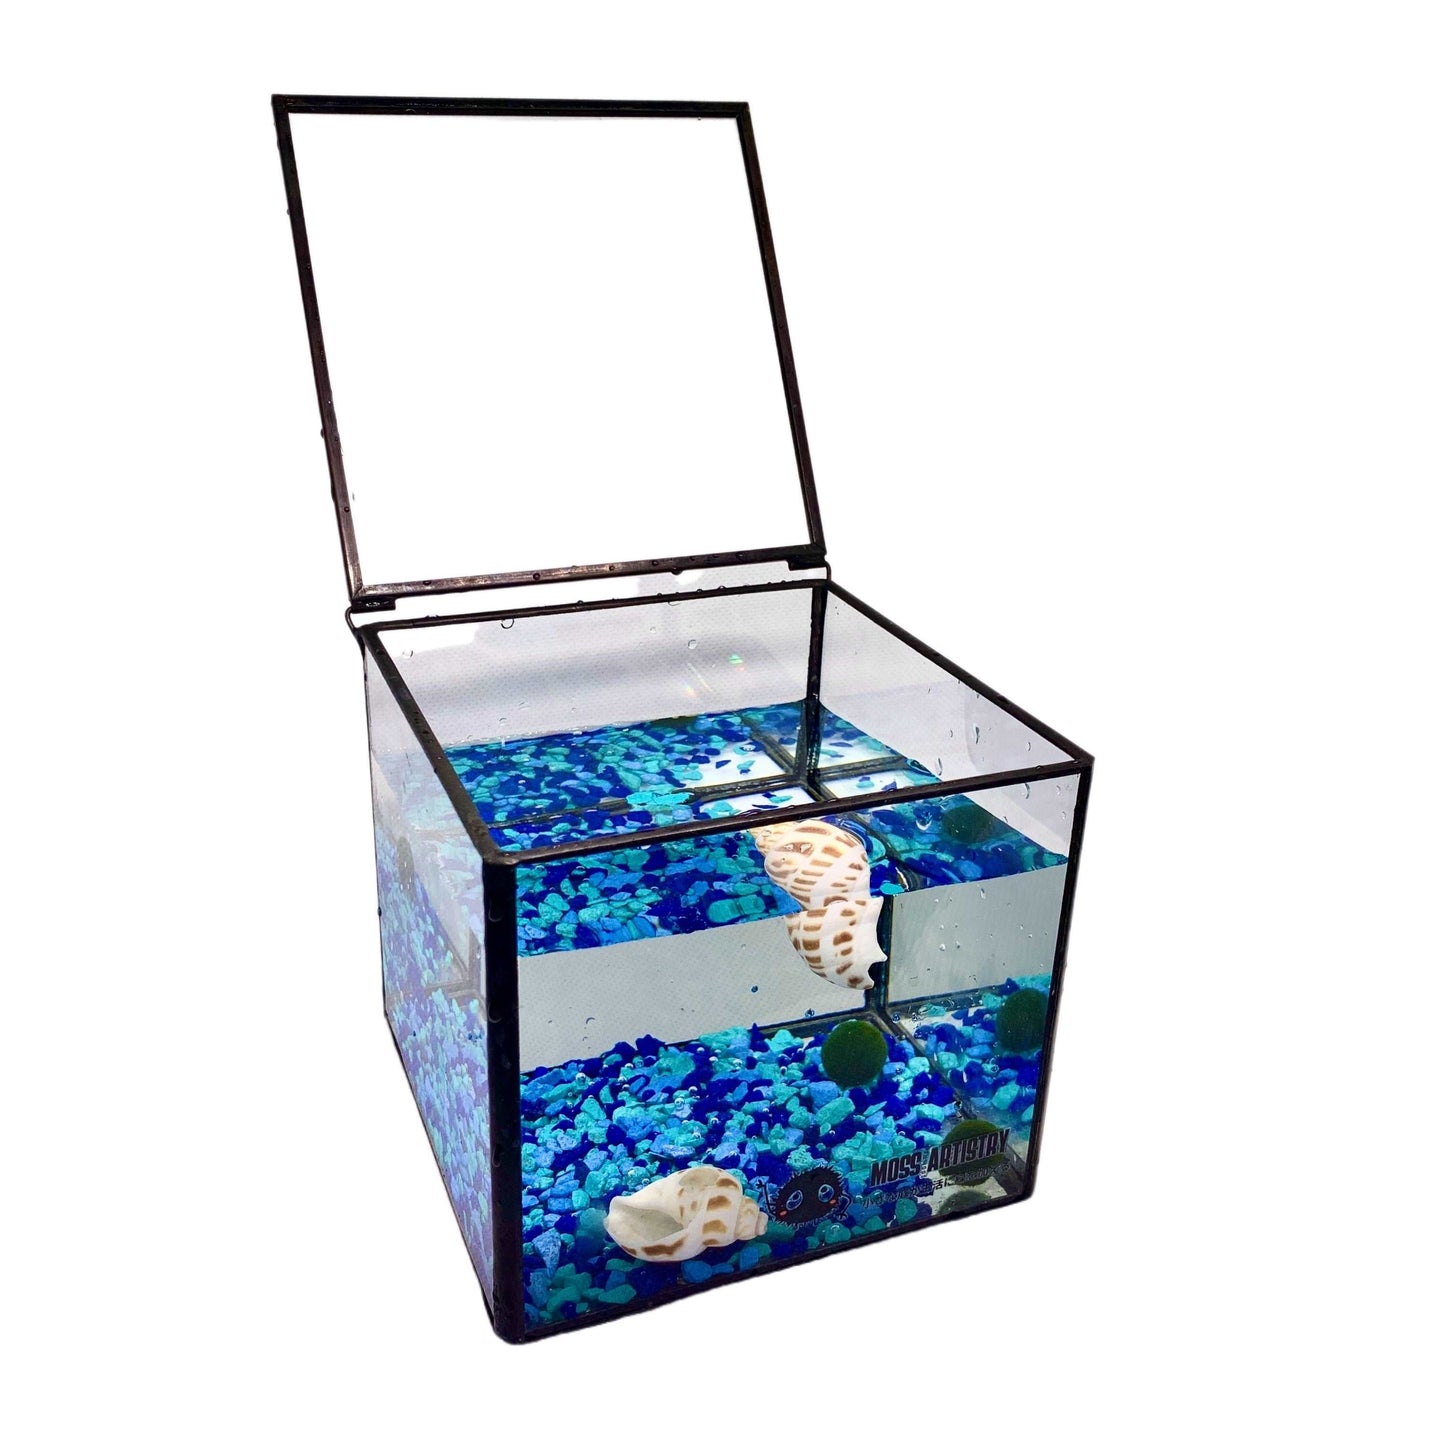 Aquarium 2PCS Moss Balls Marimo Square Glass Terrarium With Lid Mini DPerfect gift with a label for you to raise a pet and name it as plant beginners; or send a gift when a friend is promoted, or graduation gift, first meet day for cou